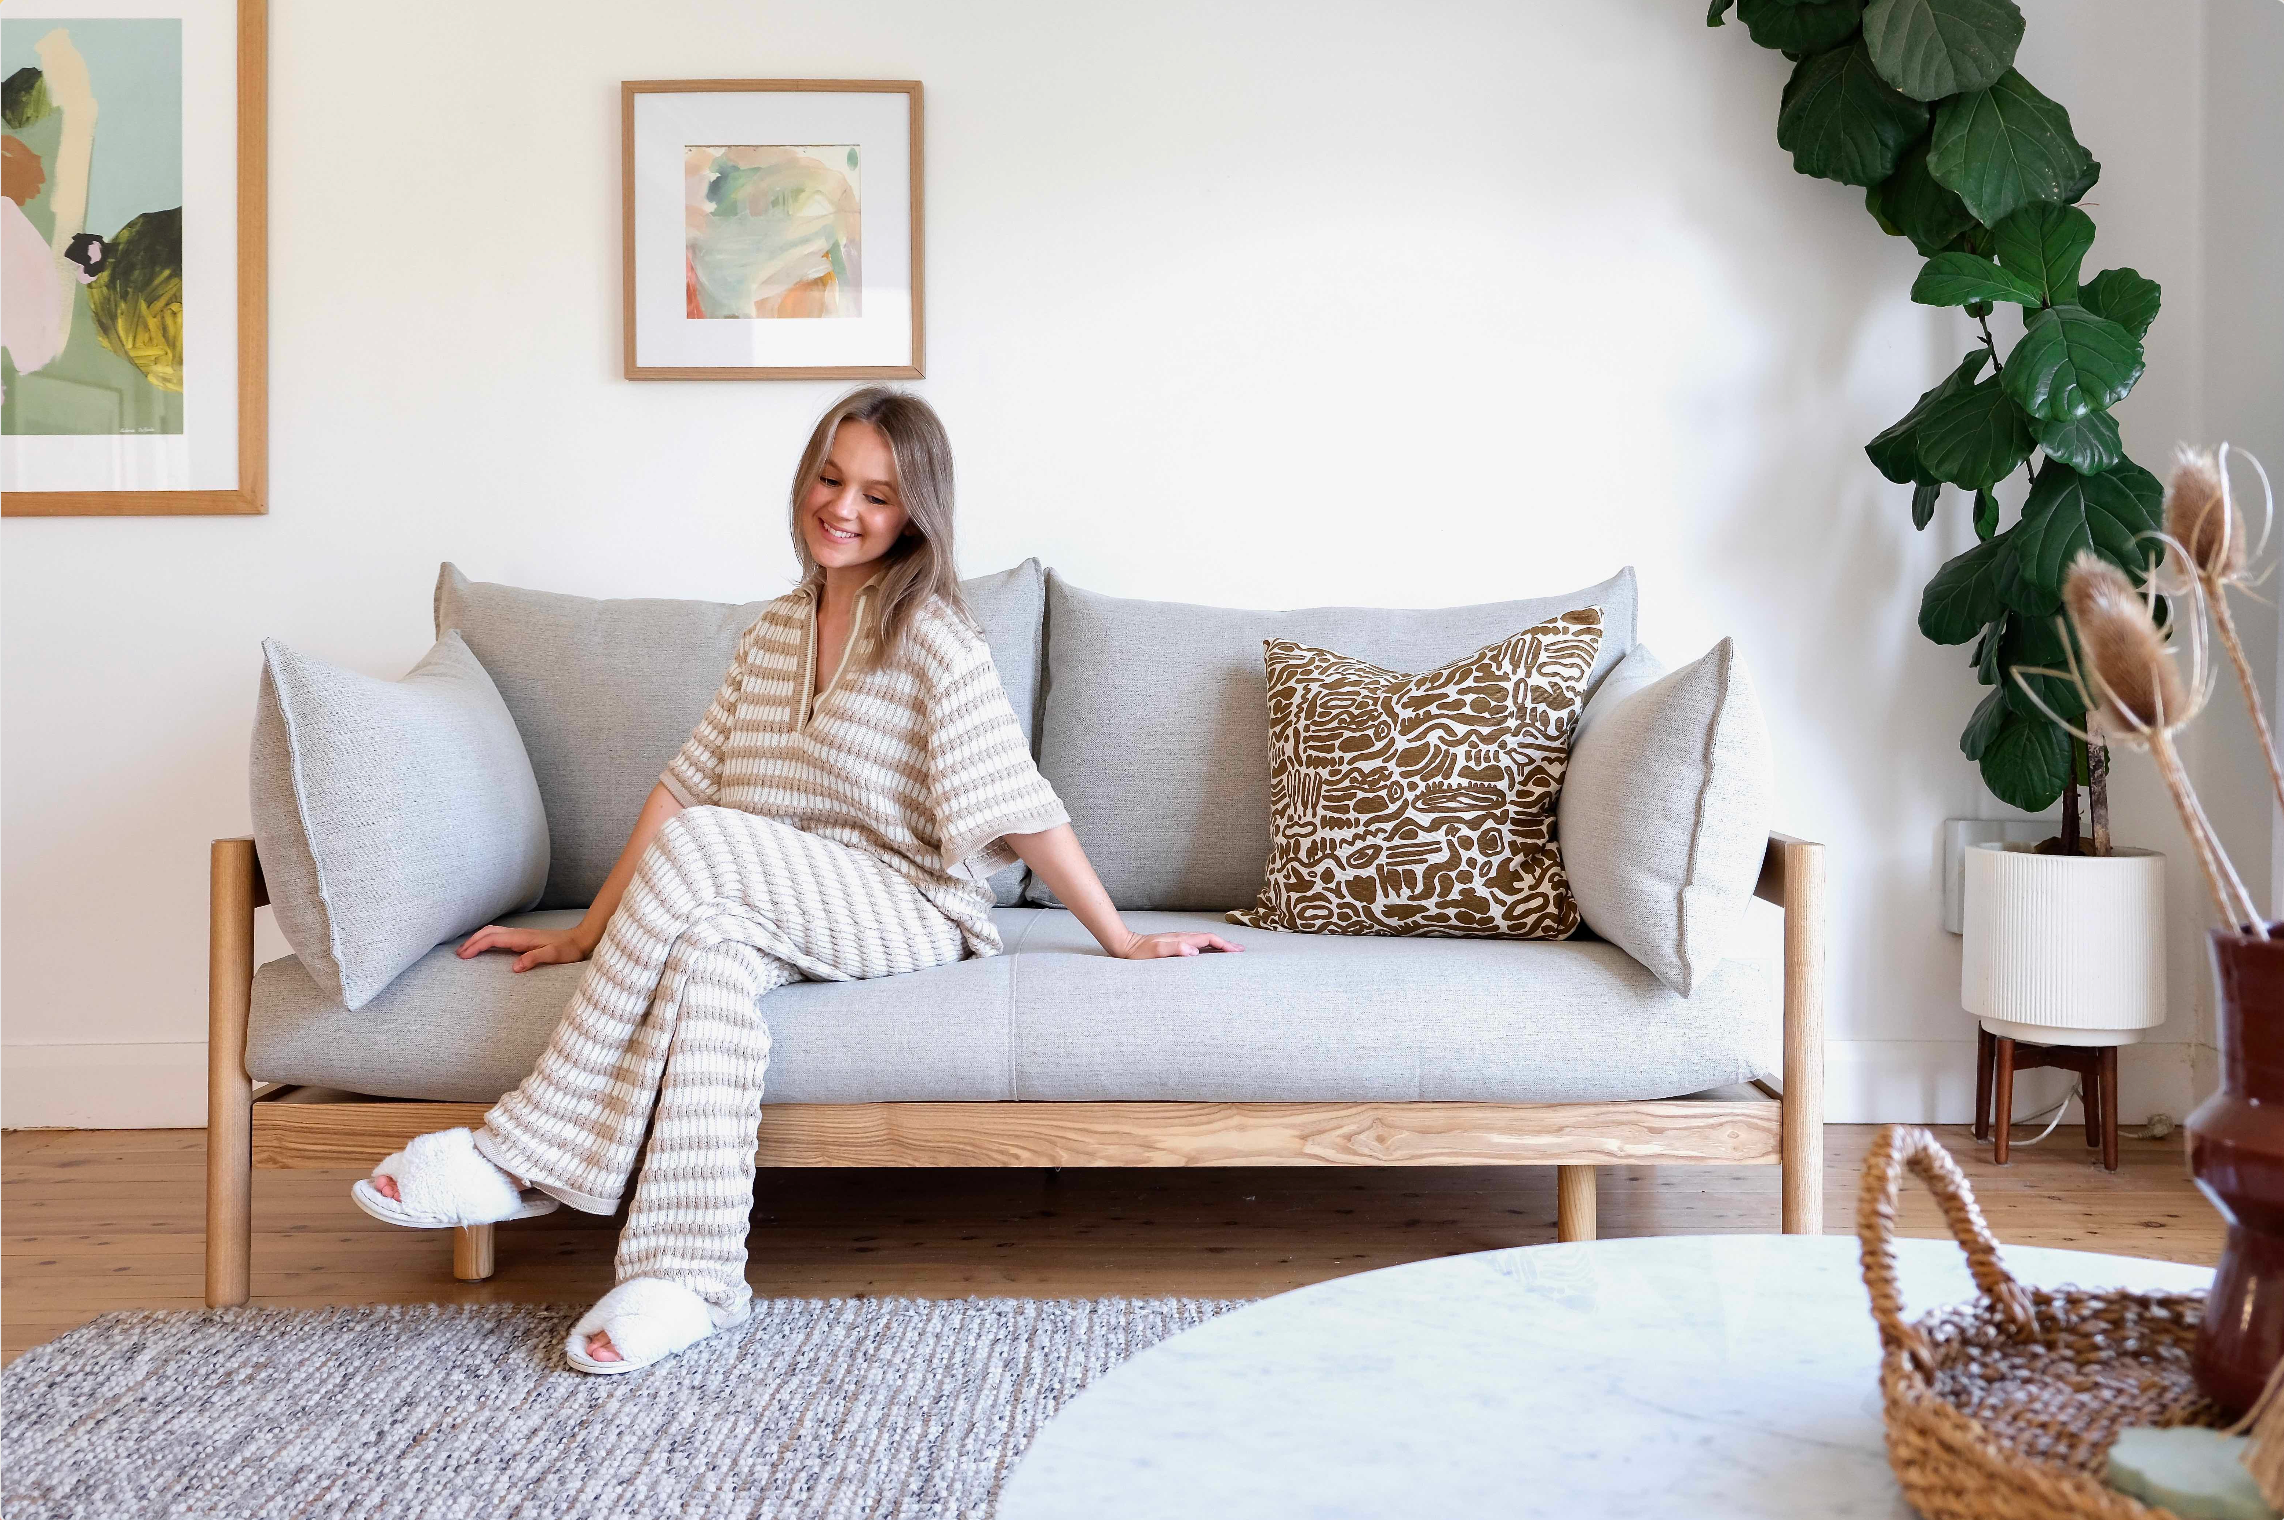 At Home with Alex Mills